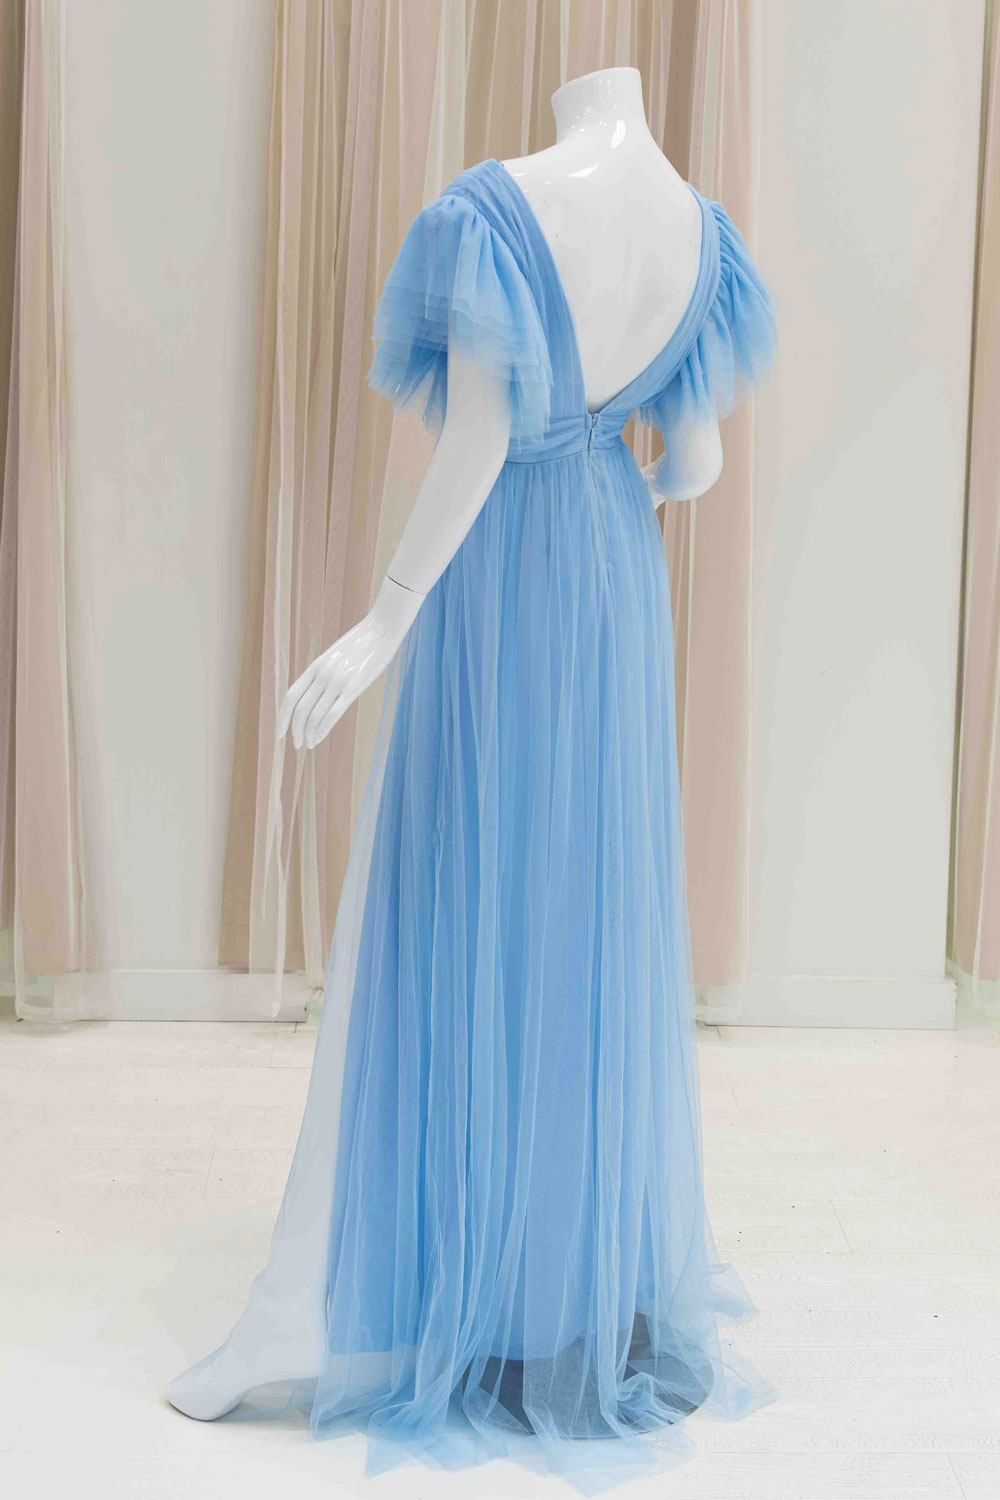 Baby Blue Baby Shower Tulle Dress